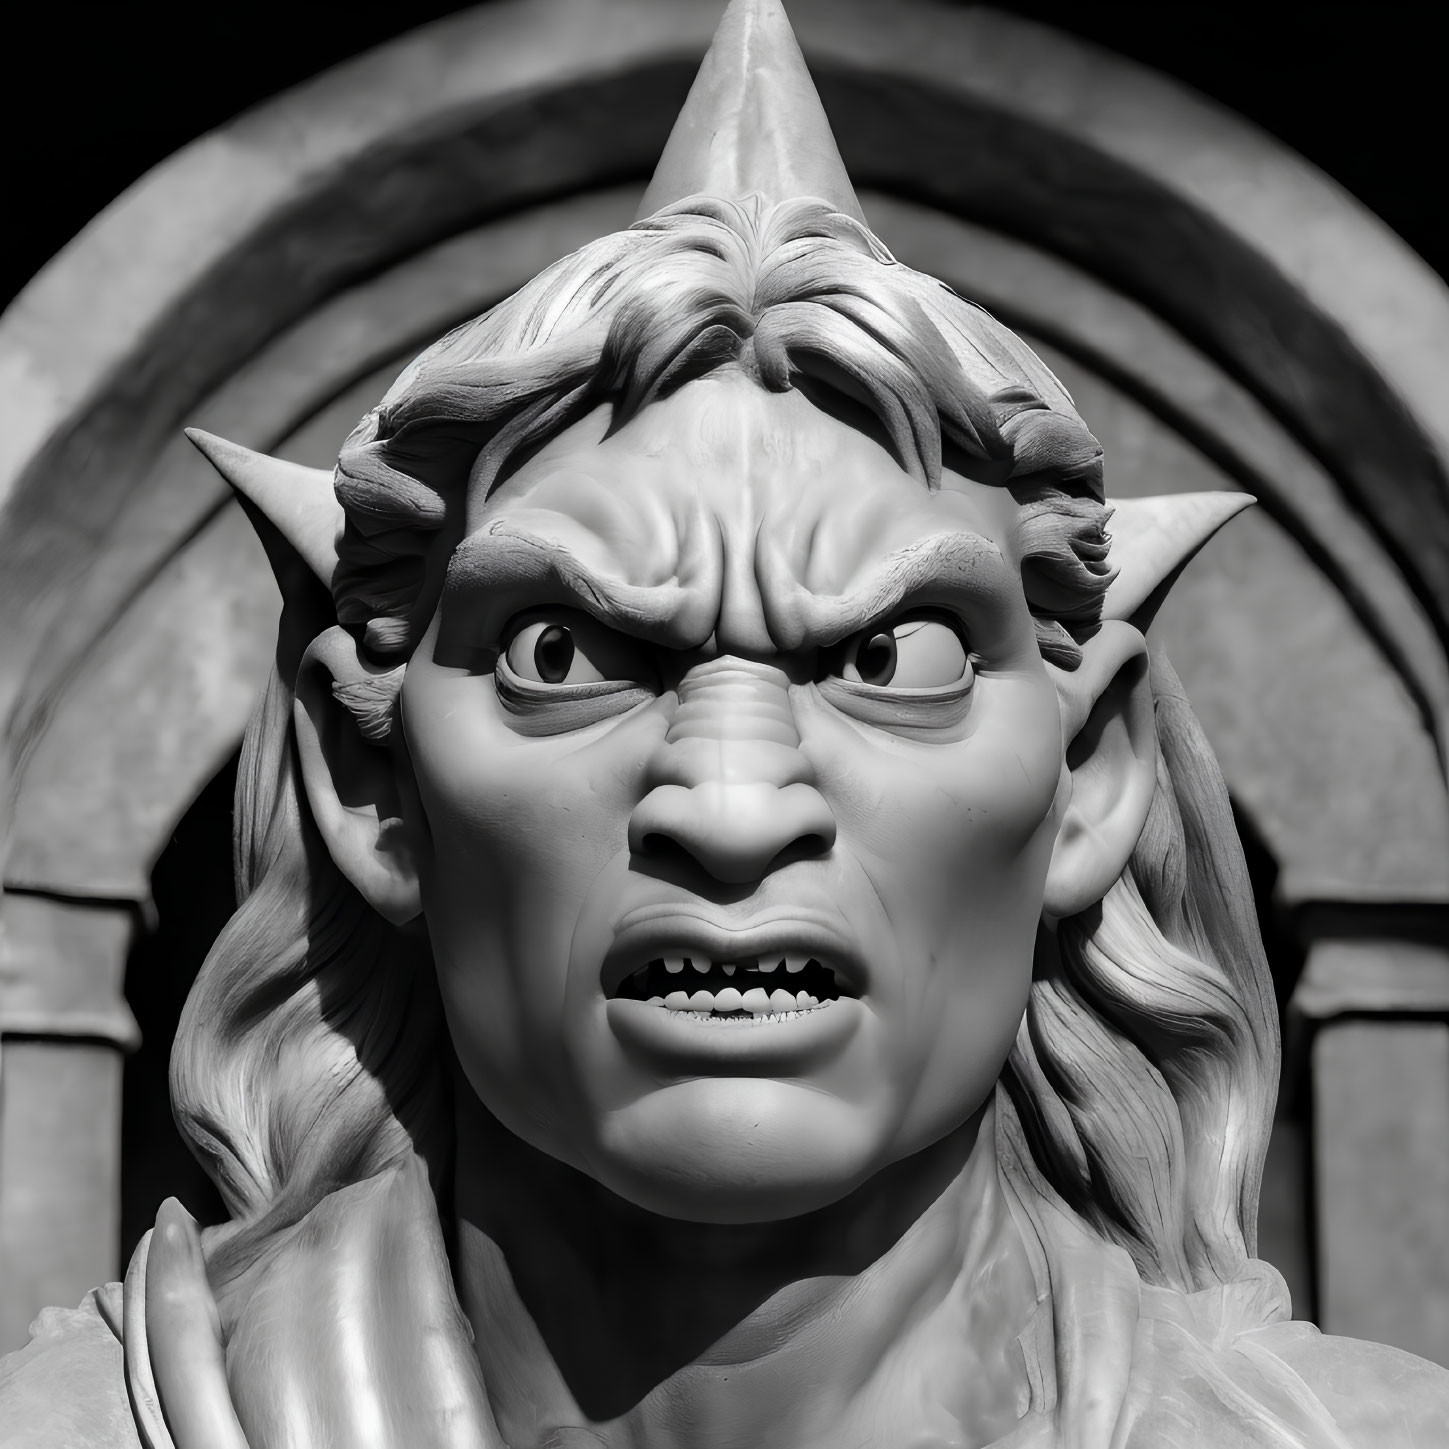 Monochrome snarling gargoyle sculpture with horns and angry expression